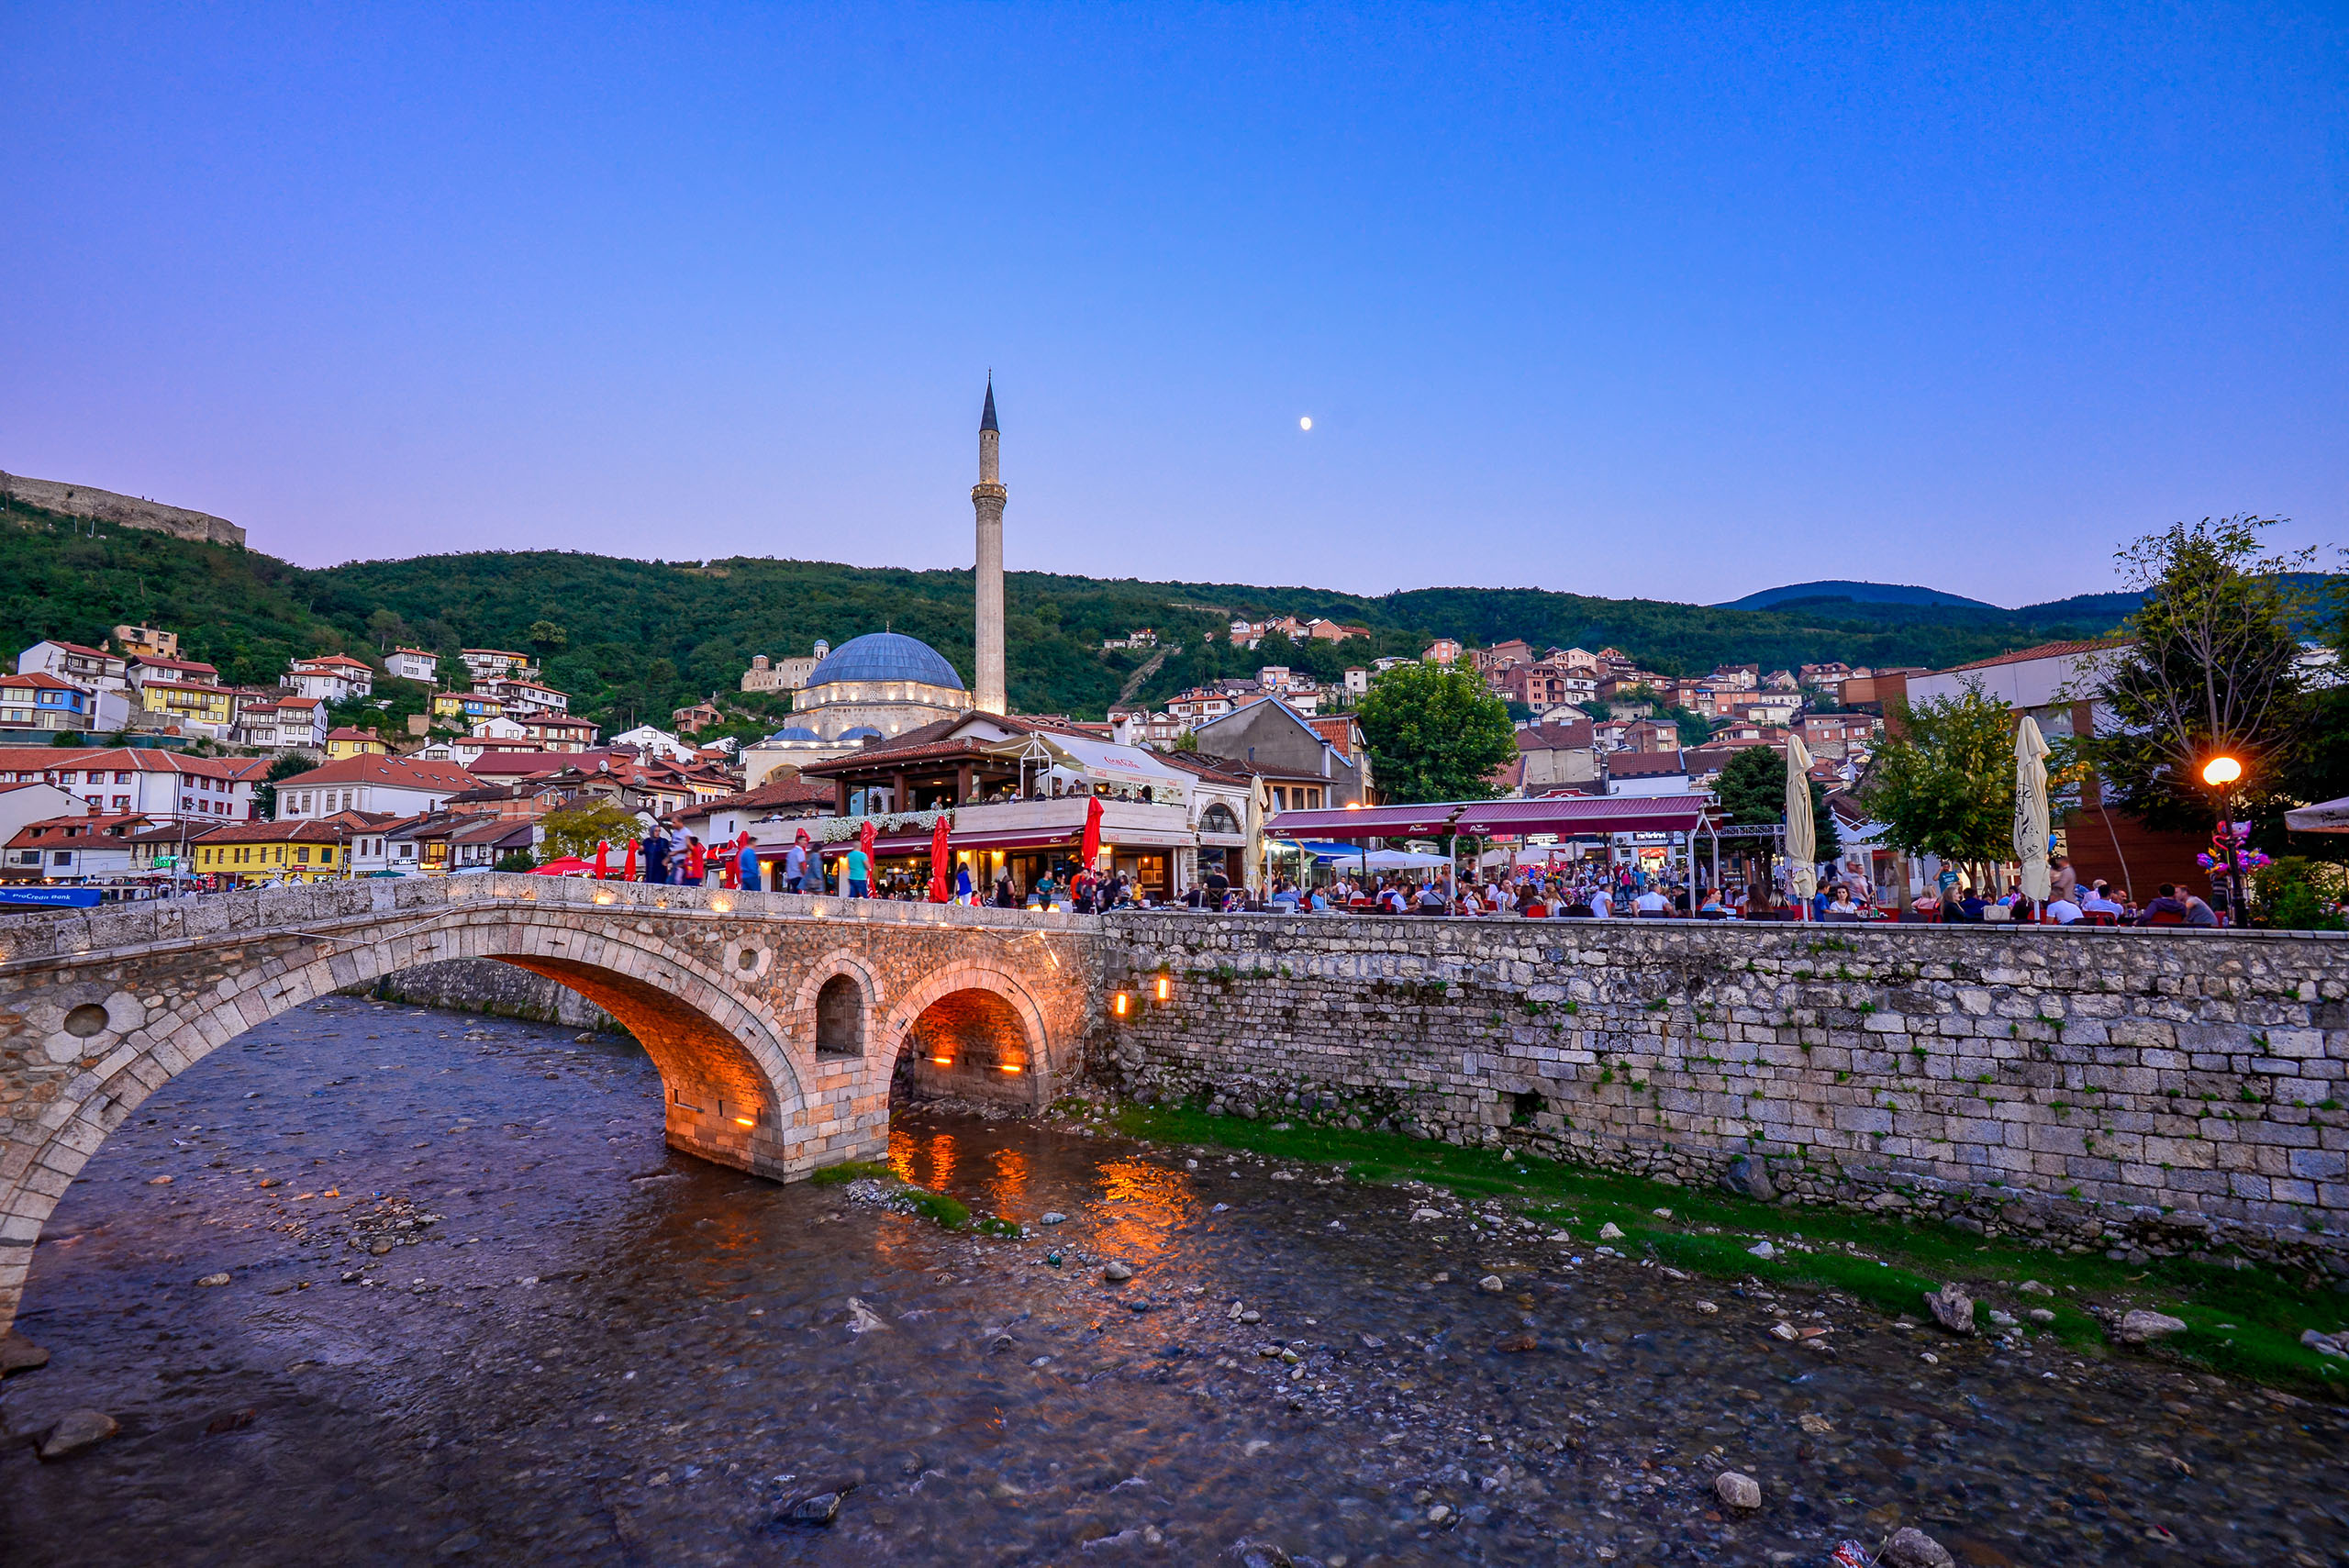 Prizren, Kosovo: August 18, 2016 - Beautiful view looking over the old bridge to the residence and urban areas by the creek in an old town in Prizren, Kosovo.